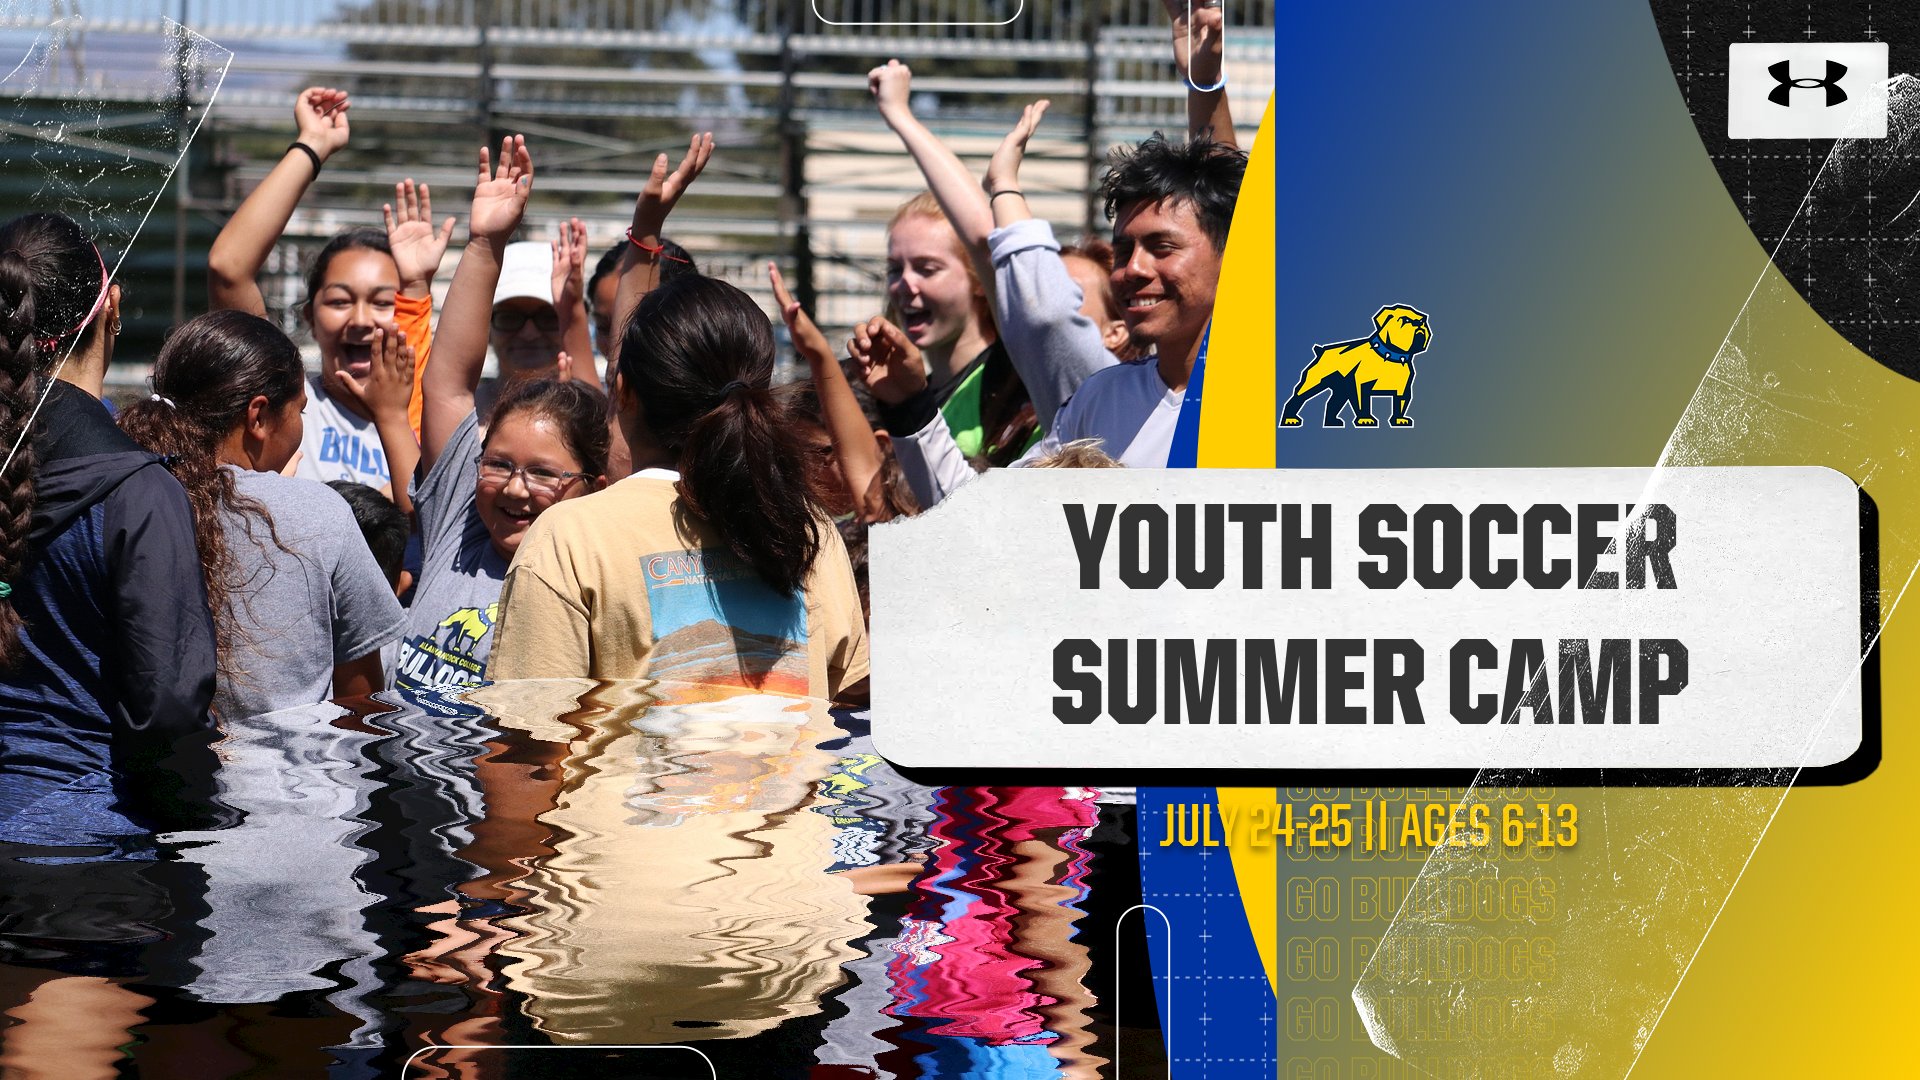 Soccer Announces Youth Summer Camp Dates, Registration Now Open